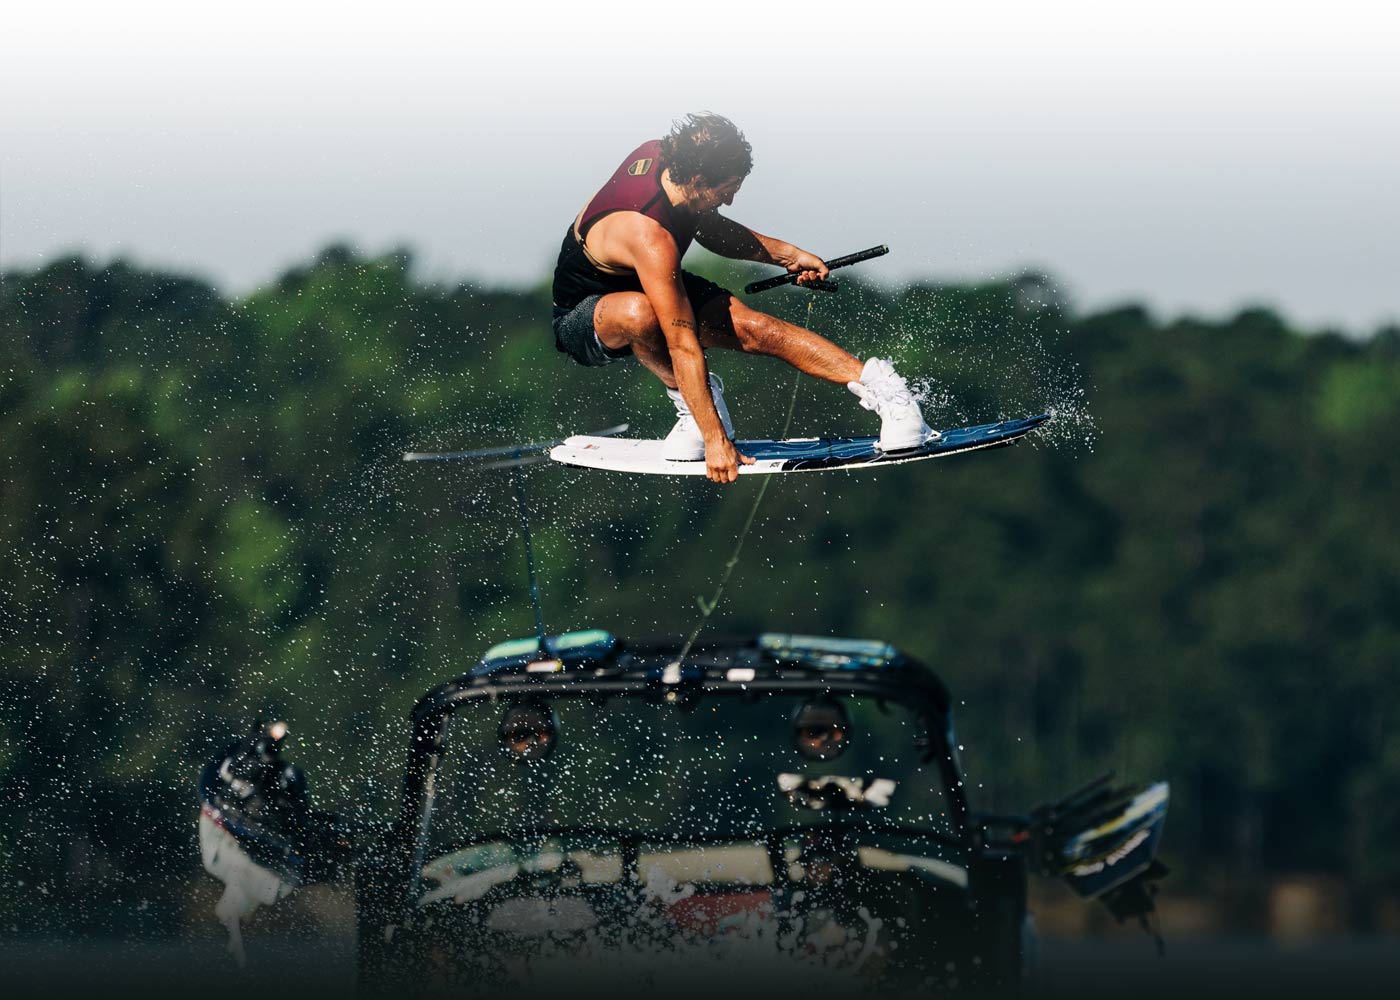 2024 Remedy Wakeboard - Liquid Force Wakeboards